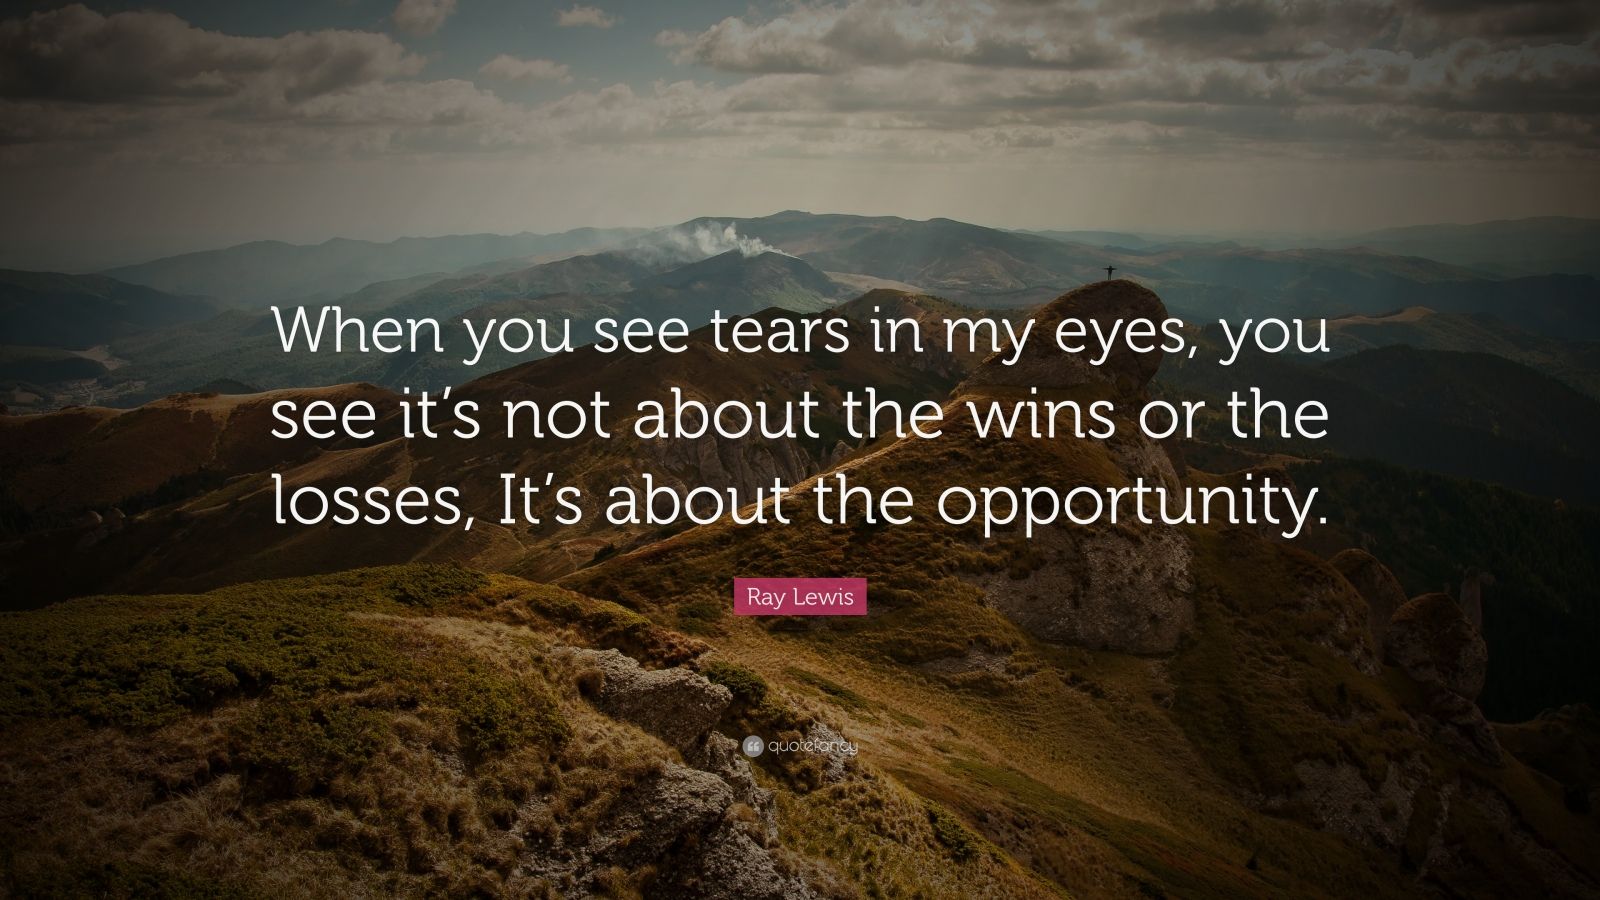 Ray Lewis Quote: “When you see tears in my eyes, you see it’s not about the wins ...1600 x 900